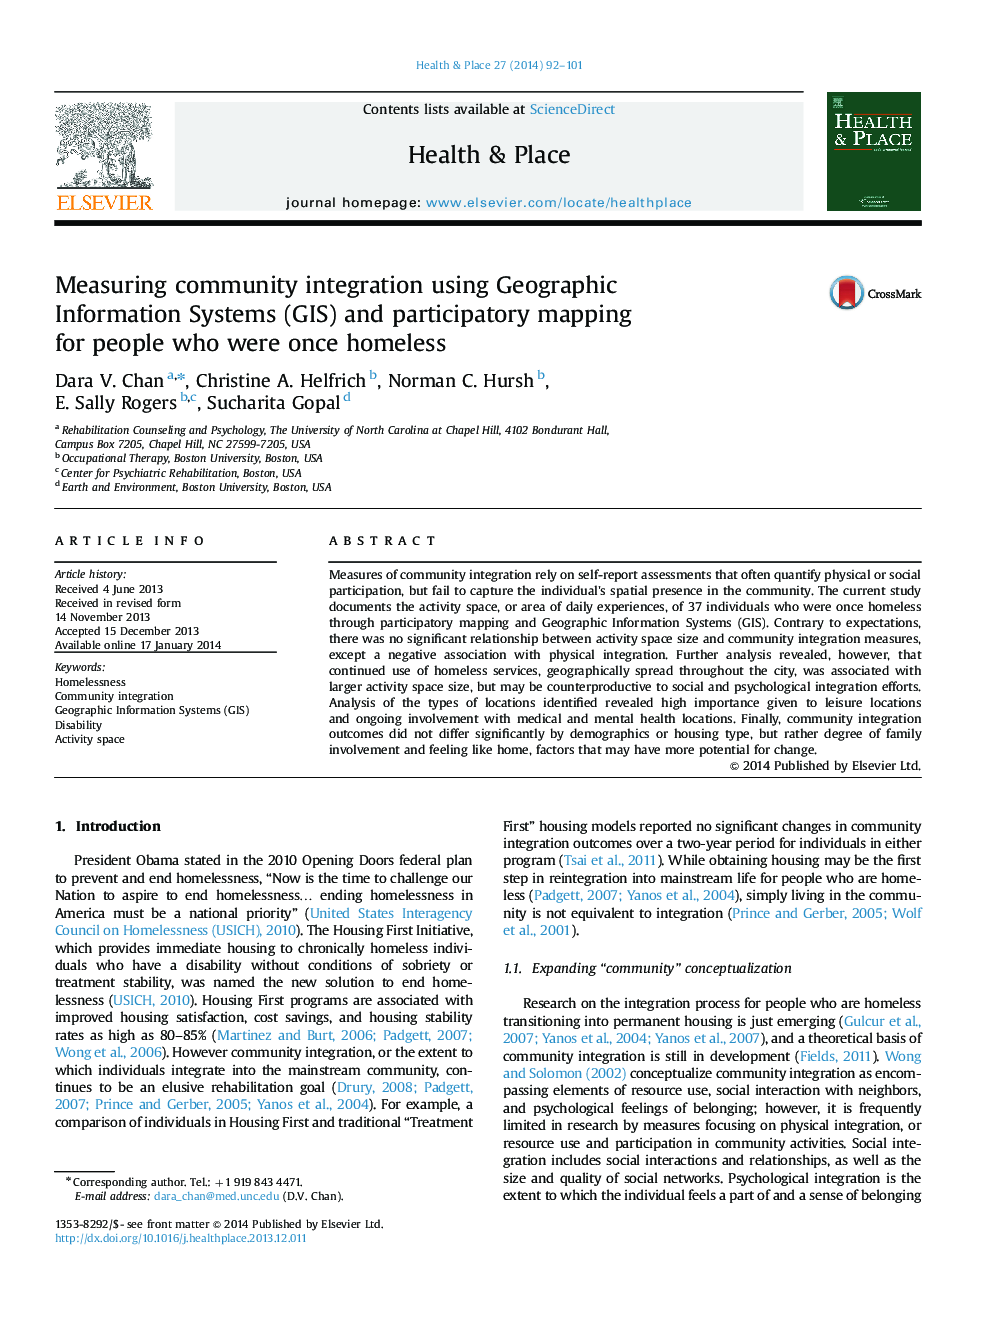 Measuring community integration using Geographic Information Systems (GIS) and participatory mapping for people who were once homeless